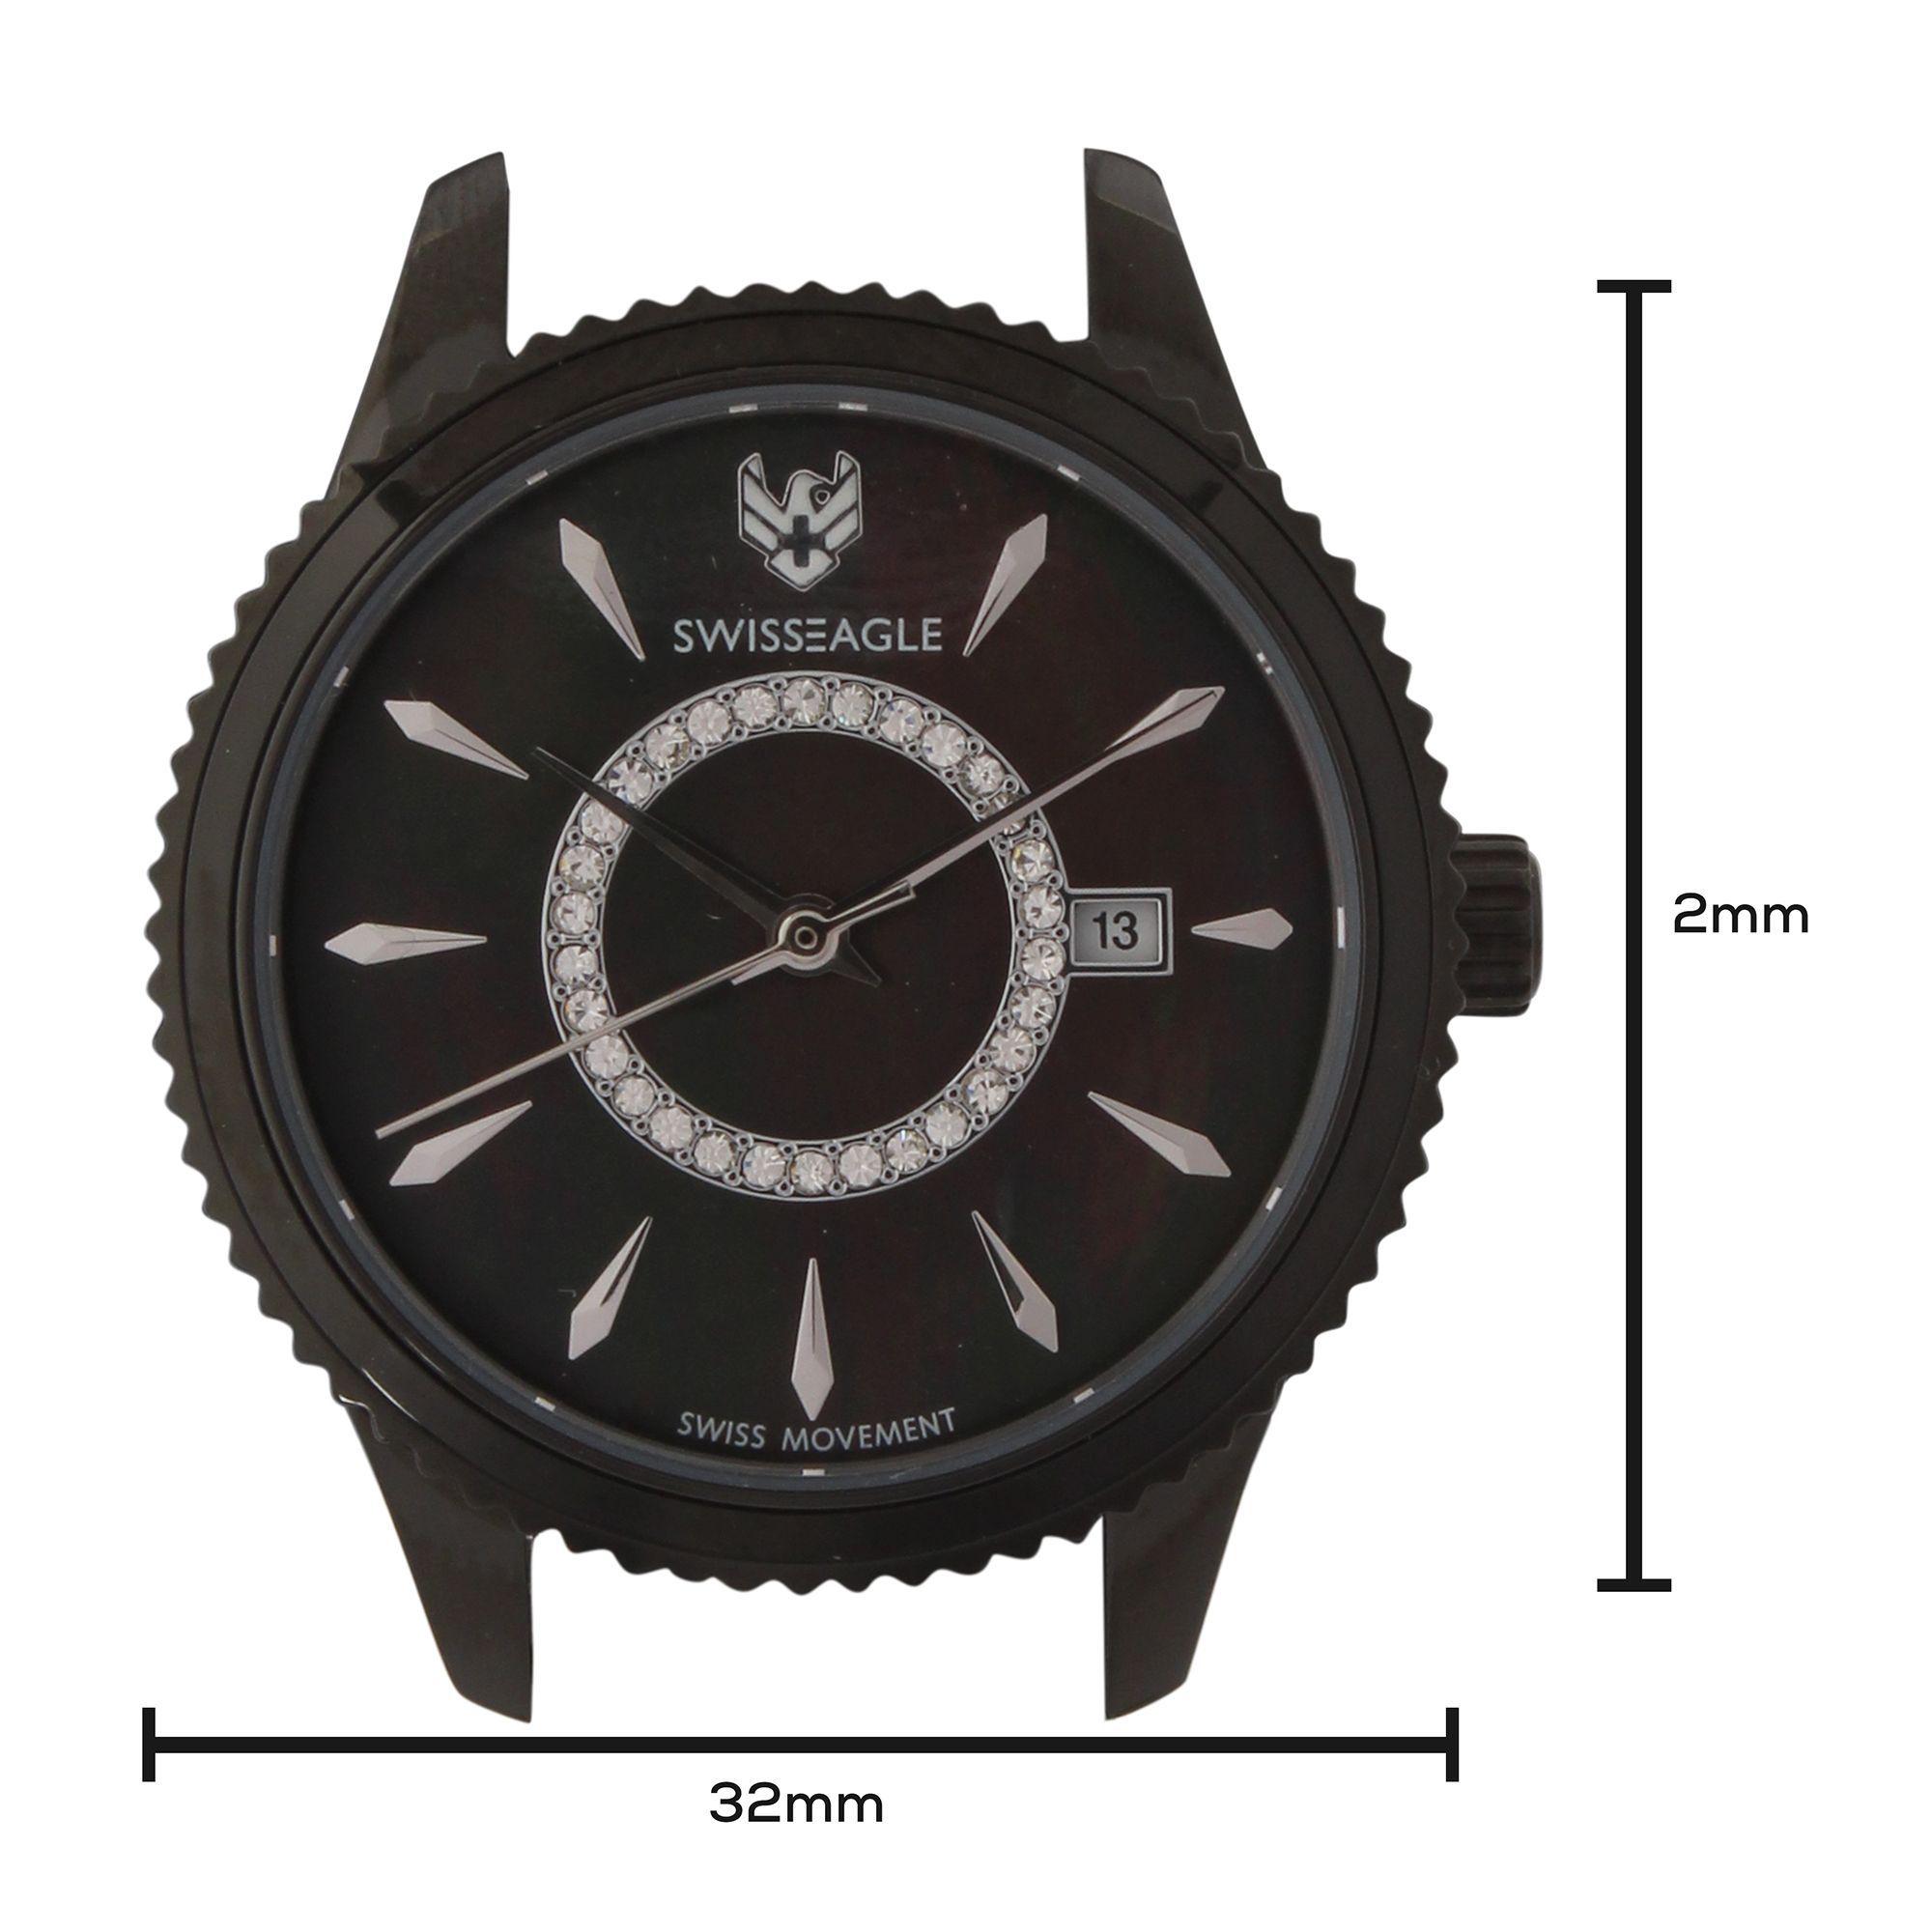 Round New Eagle Time Mens Wrist Watch, For Personal Use, Model Name/Number:  Eagletime Black at Rs 110 in New Delhi